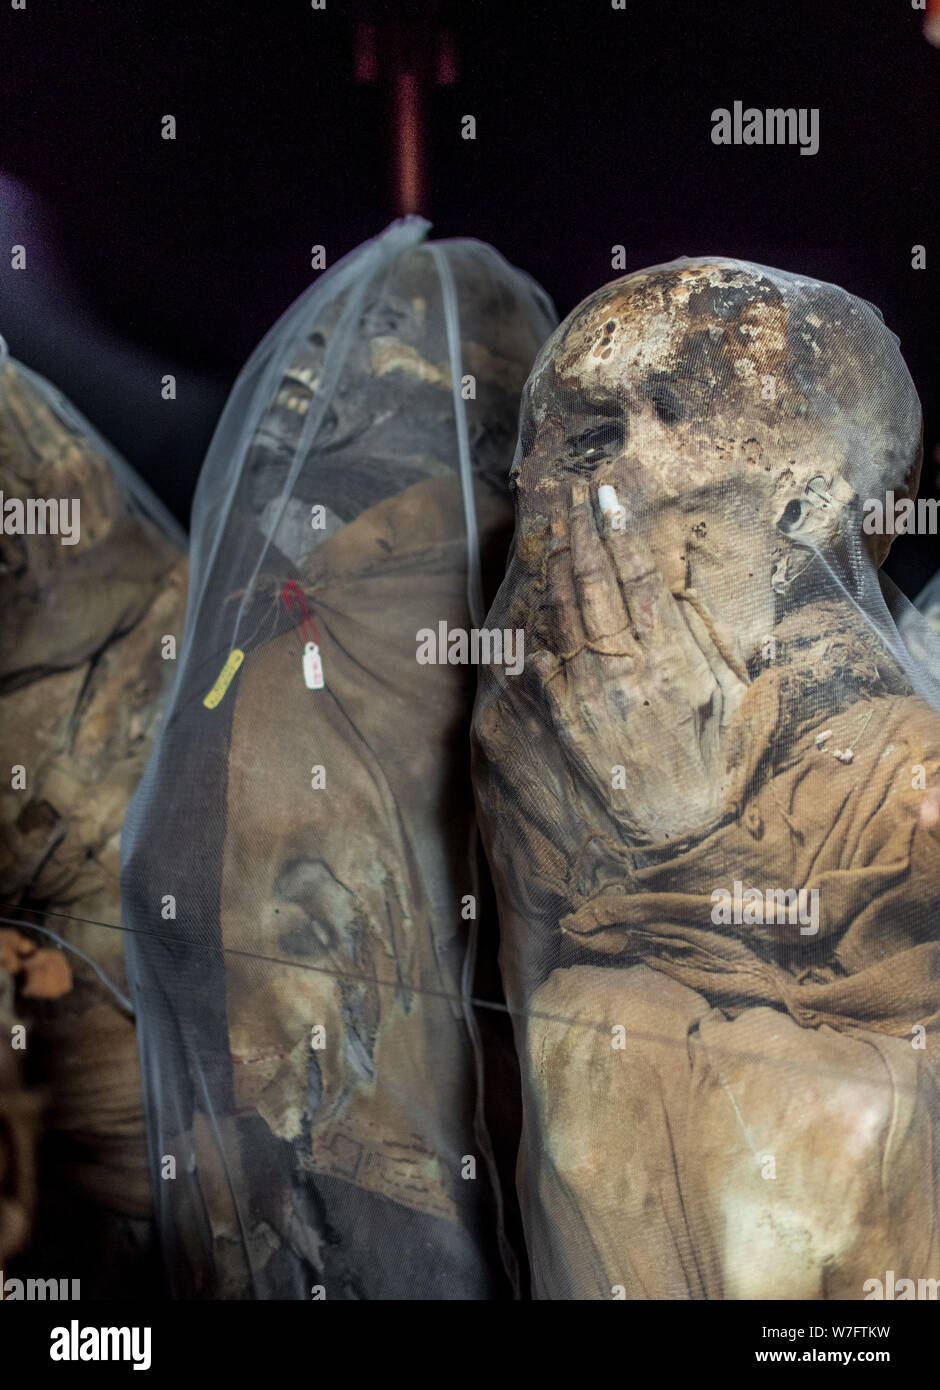 The famous mummies that have been found at tombs near Laguna de los Condores (Lake of the Condors) and can now be seen at Leymebamba museum. Stock Photo